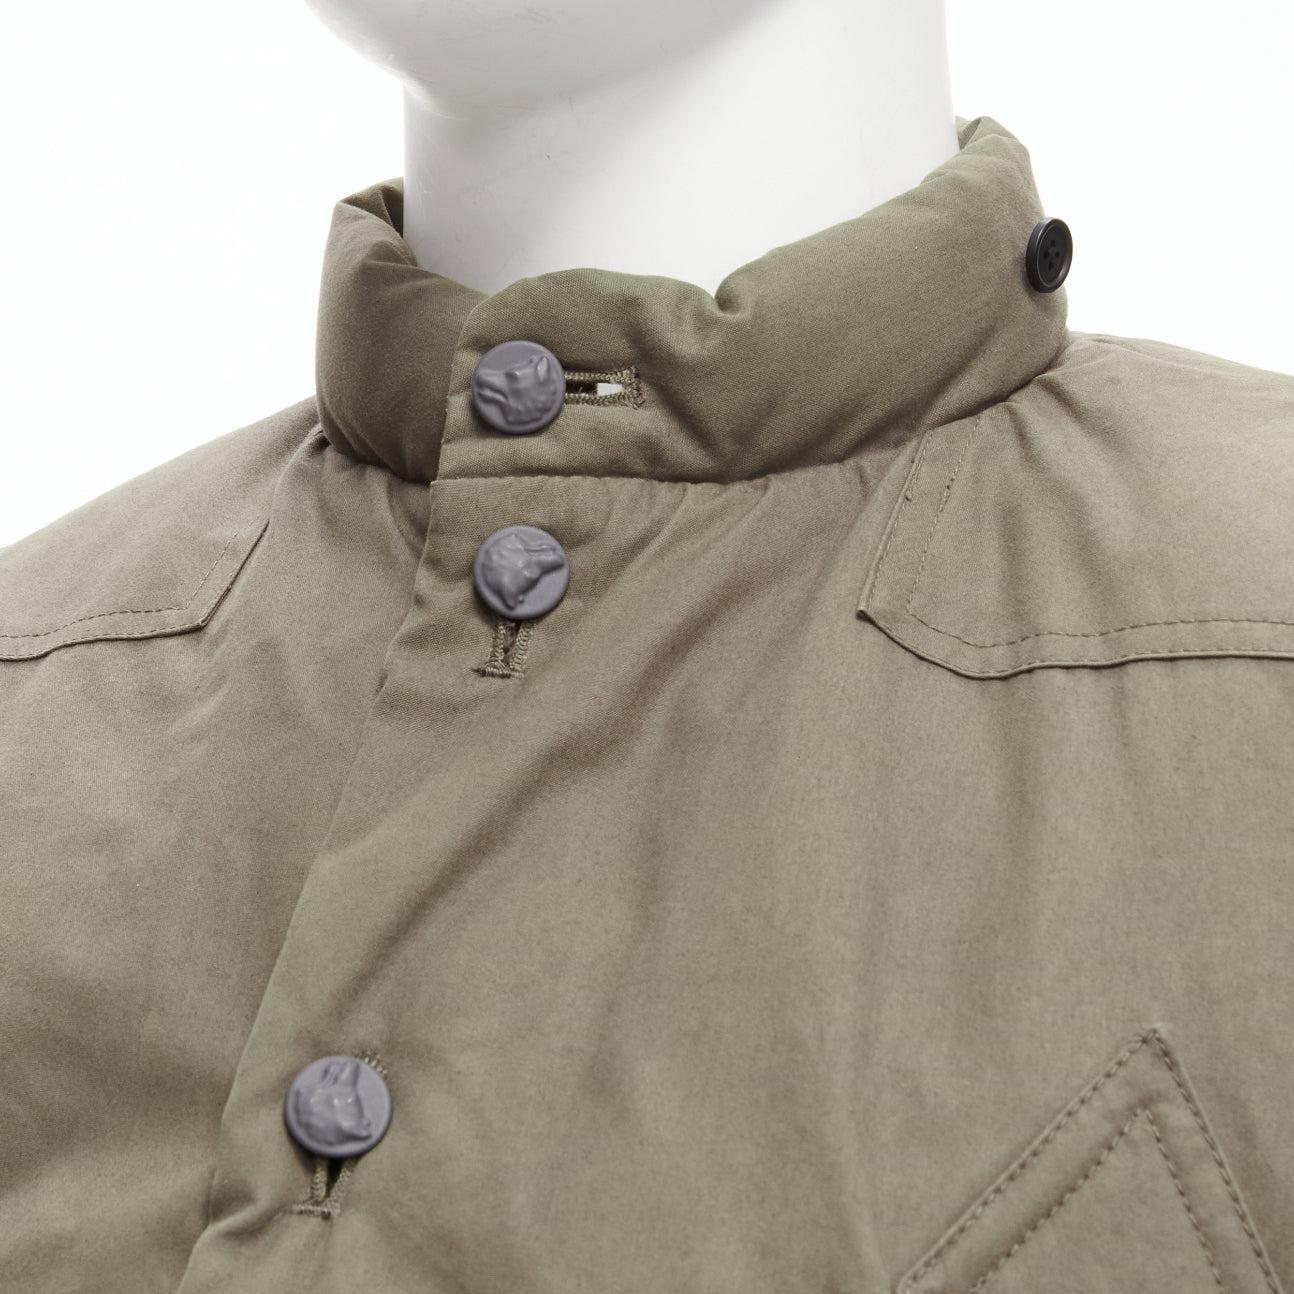 DER SAMMLER khaki weatherproof 100% ventile cotton padded puffer vest jacket EU48 M
Reference: YNWG/A00190
Brand: Der Sammler
Material: Cotton
Color: Khaki, Purple
Pattern: Solid
Closure: Button
Lining: Purple Fabric
Extra Details: Zip and button